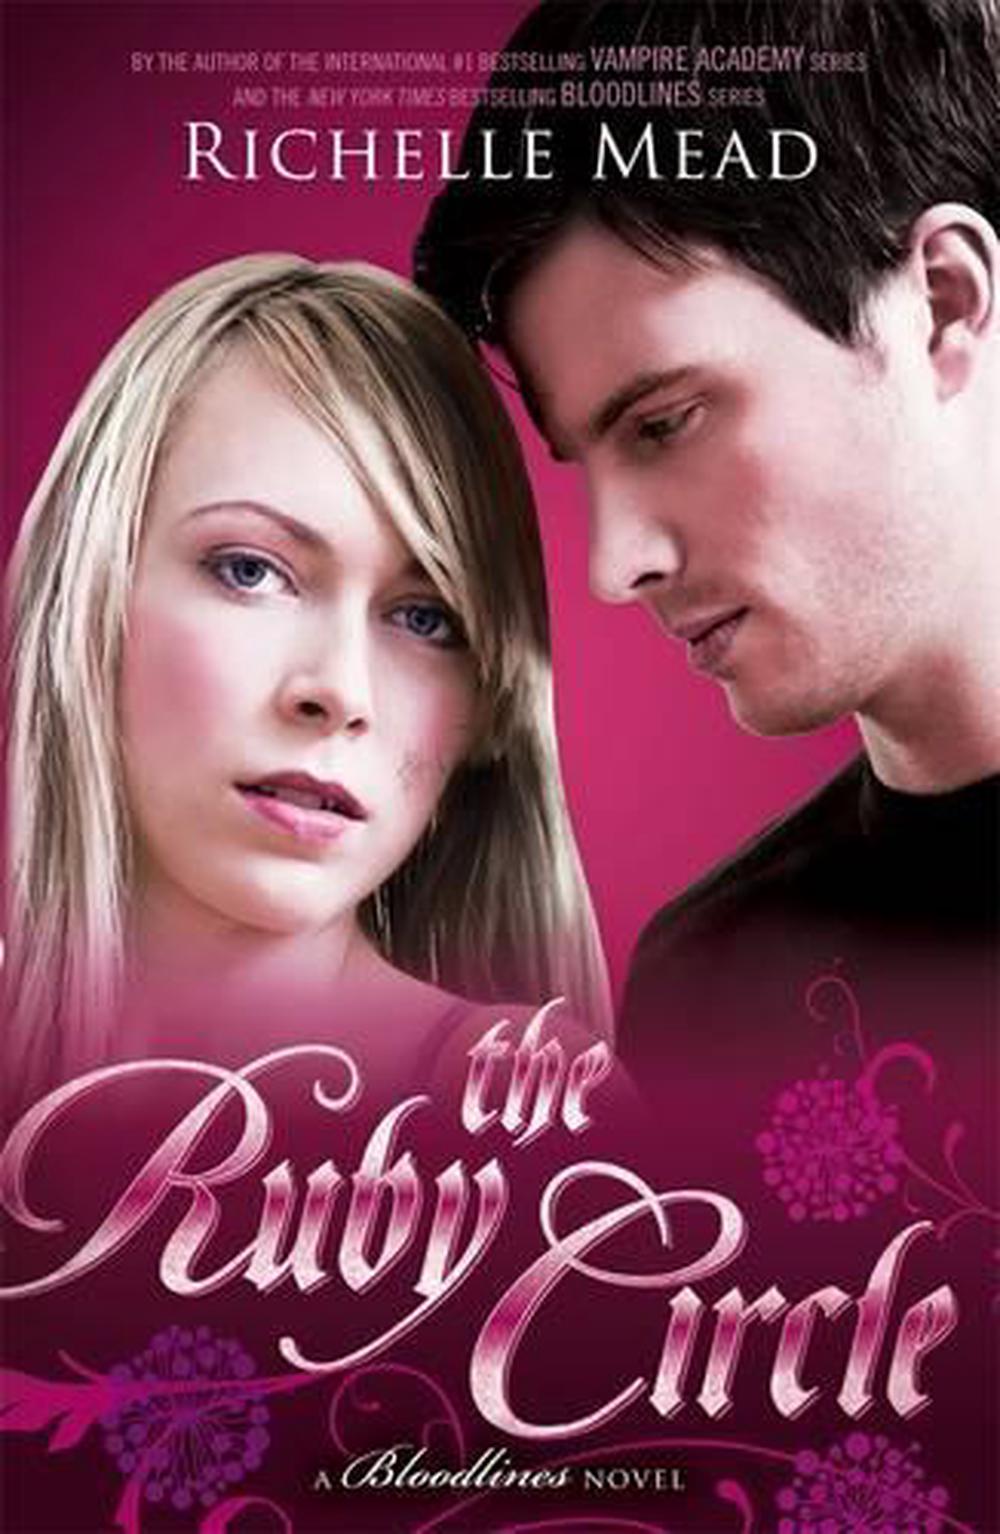 The Ruby Circle Bloodlines Book 6 by Richelle Mead, Paperback